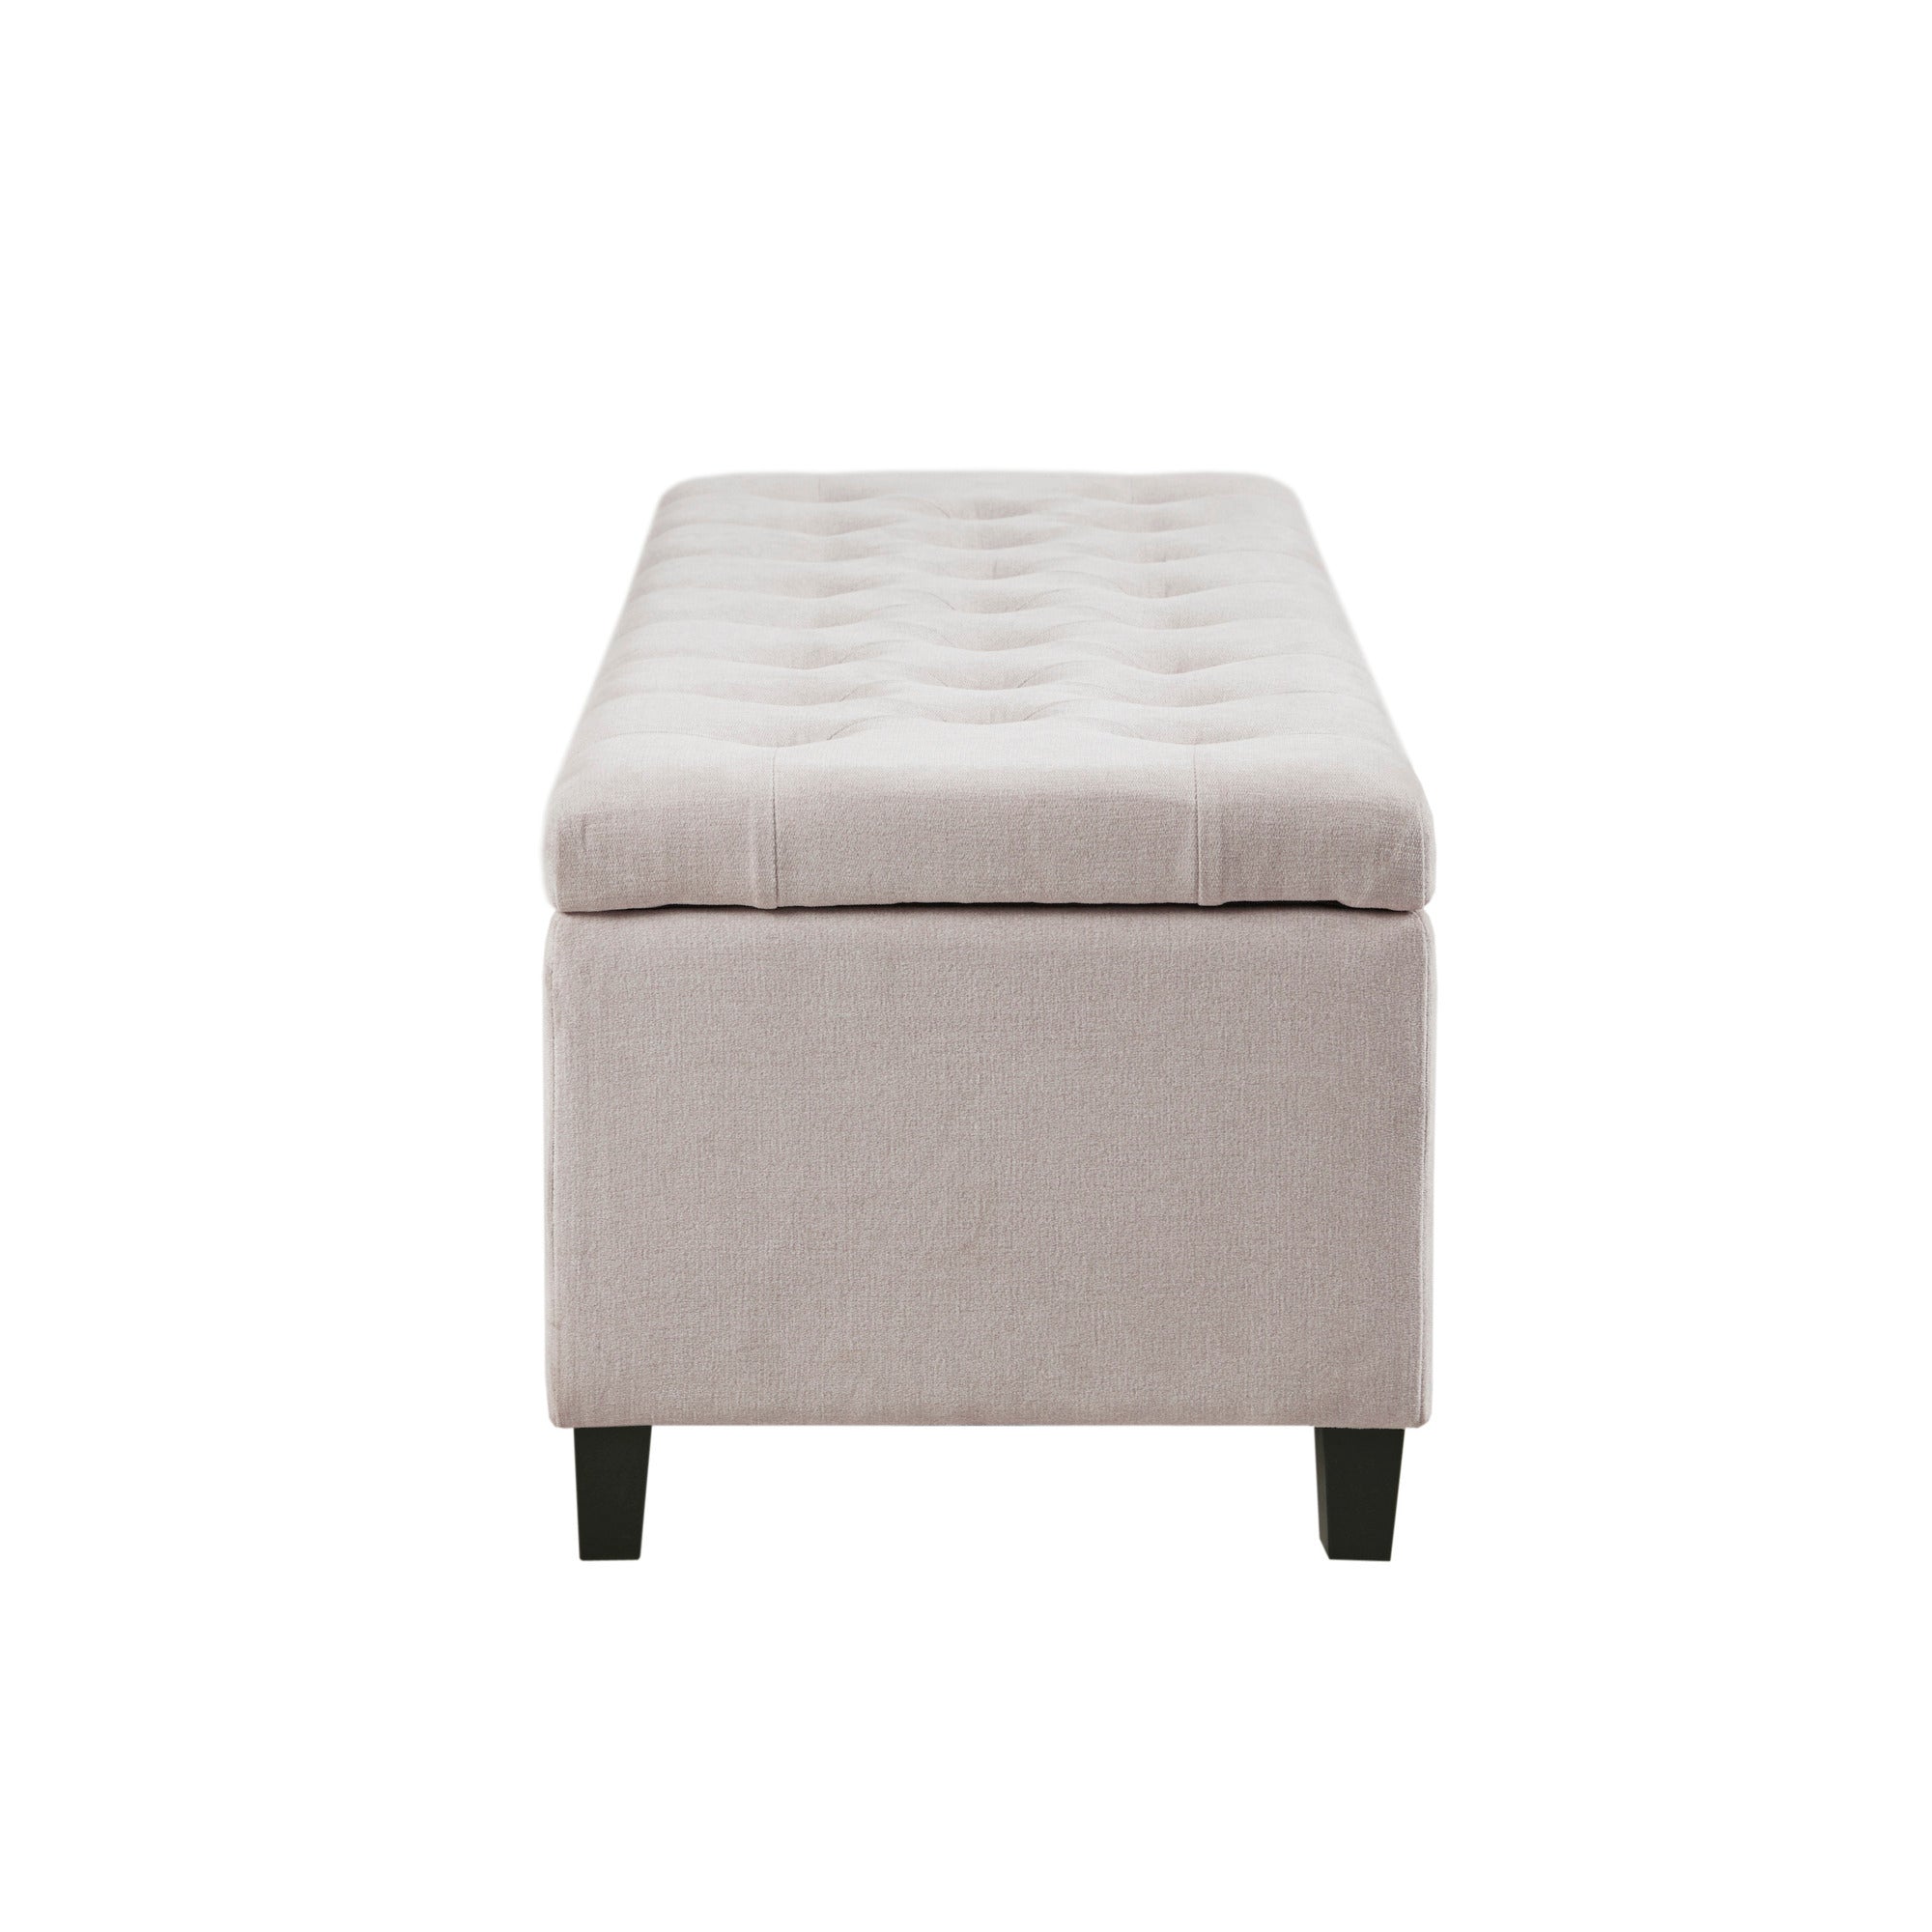 NOBLEMOOD Tufted Top End of Bed Storage Bench for Bedroom, Sofa Ottoman with Storage and Wood Legs for Living Room, White